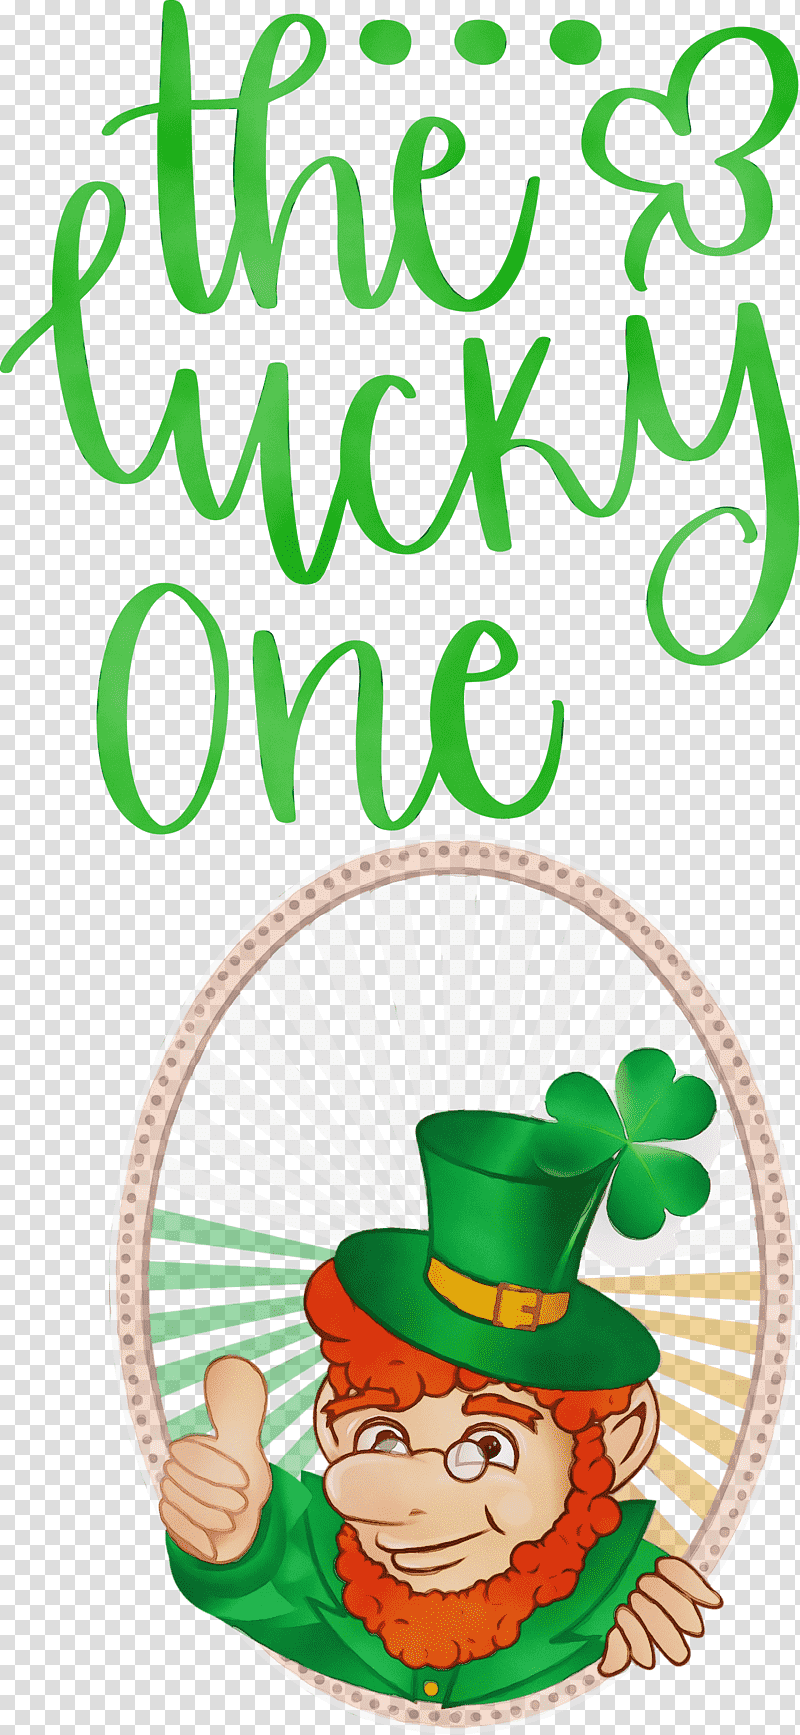 leaf tree meter meal kaltex, Lucky One, St Patricks Day, Watercolor, Paint, Wet Ink, Behavior transparent background PNG clipart